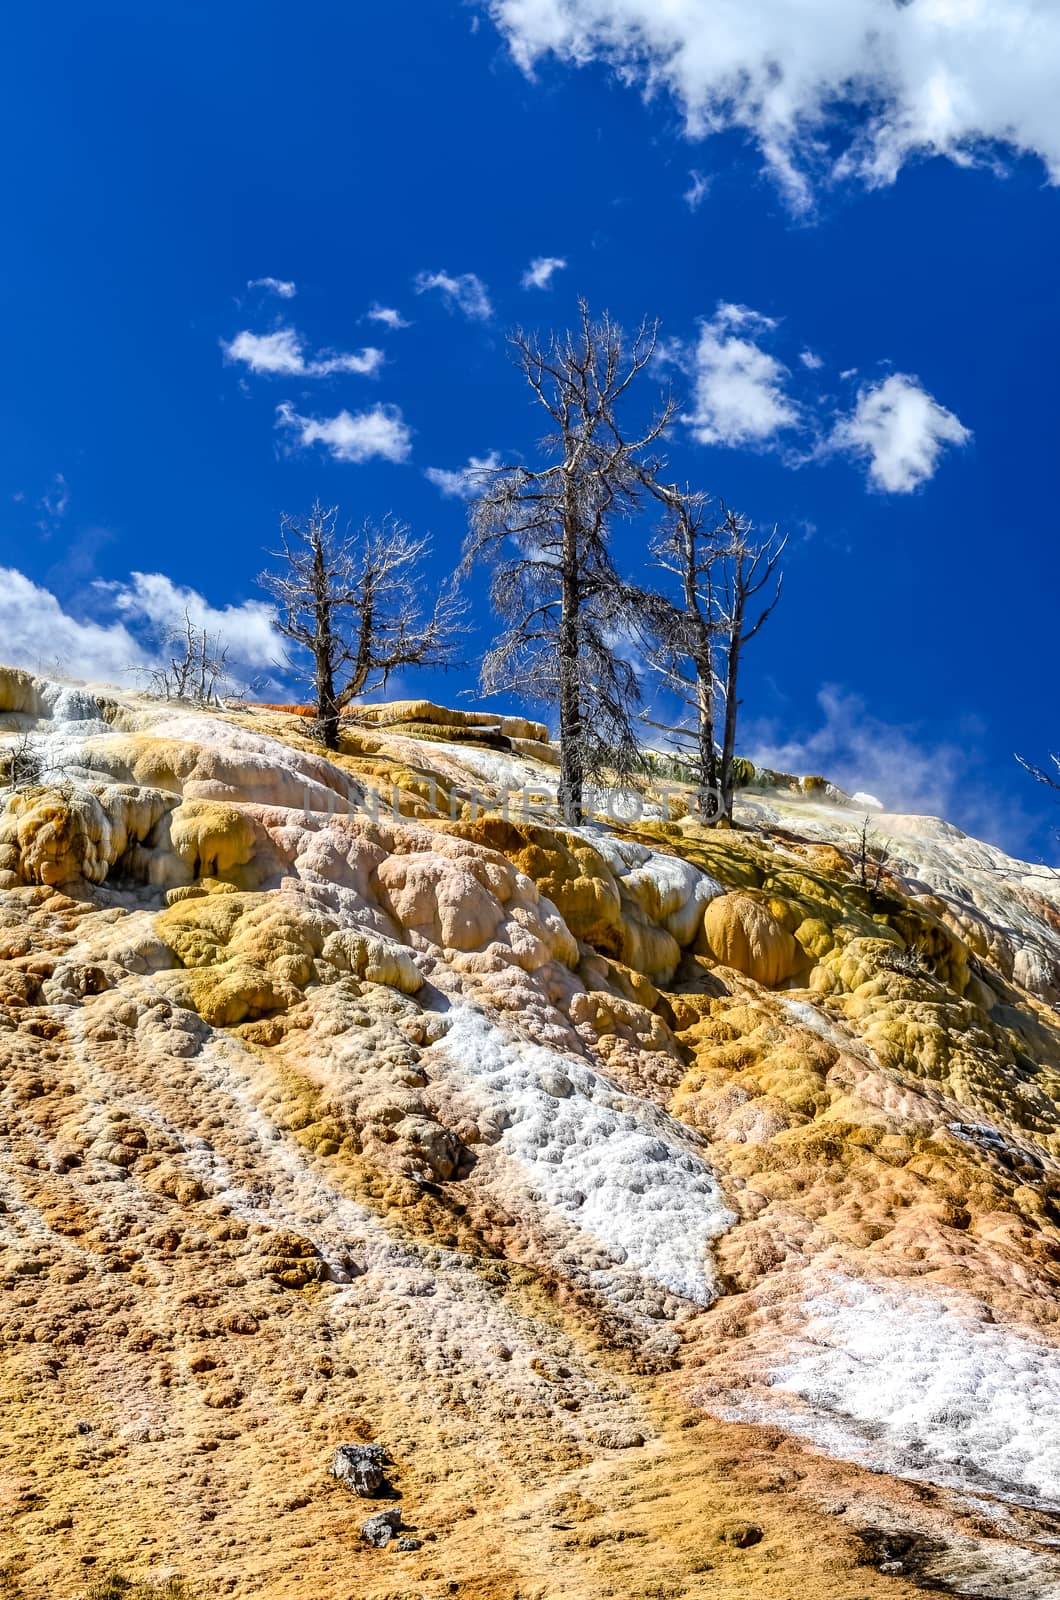 Scenic view of geothermal land and dry trees in Yellowstone NP, Wyoming, USA